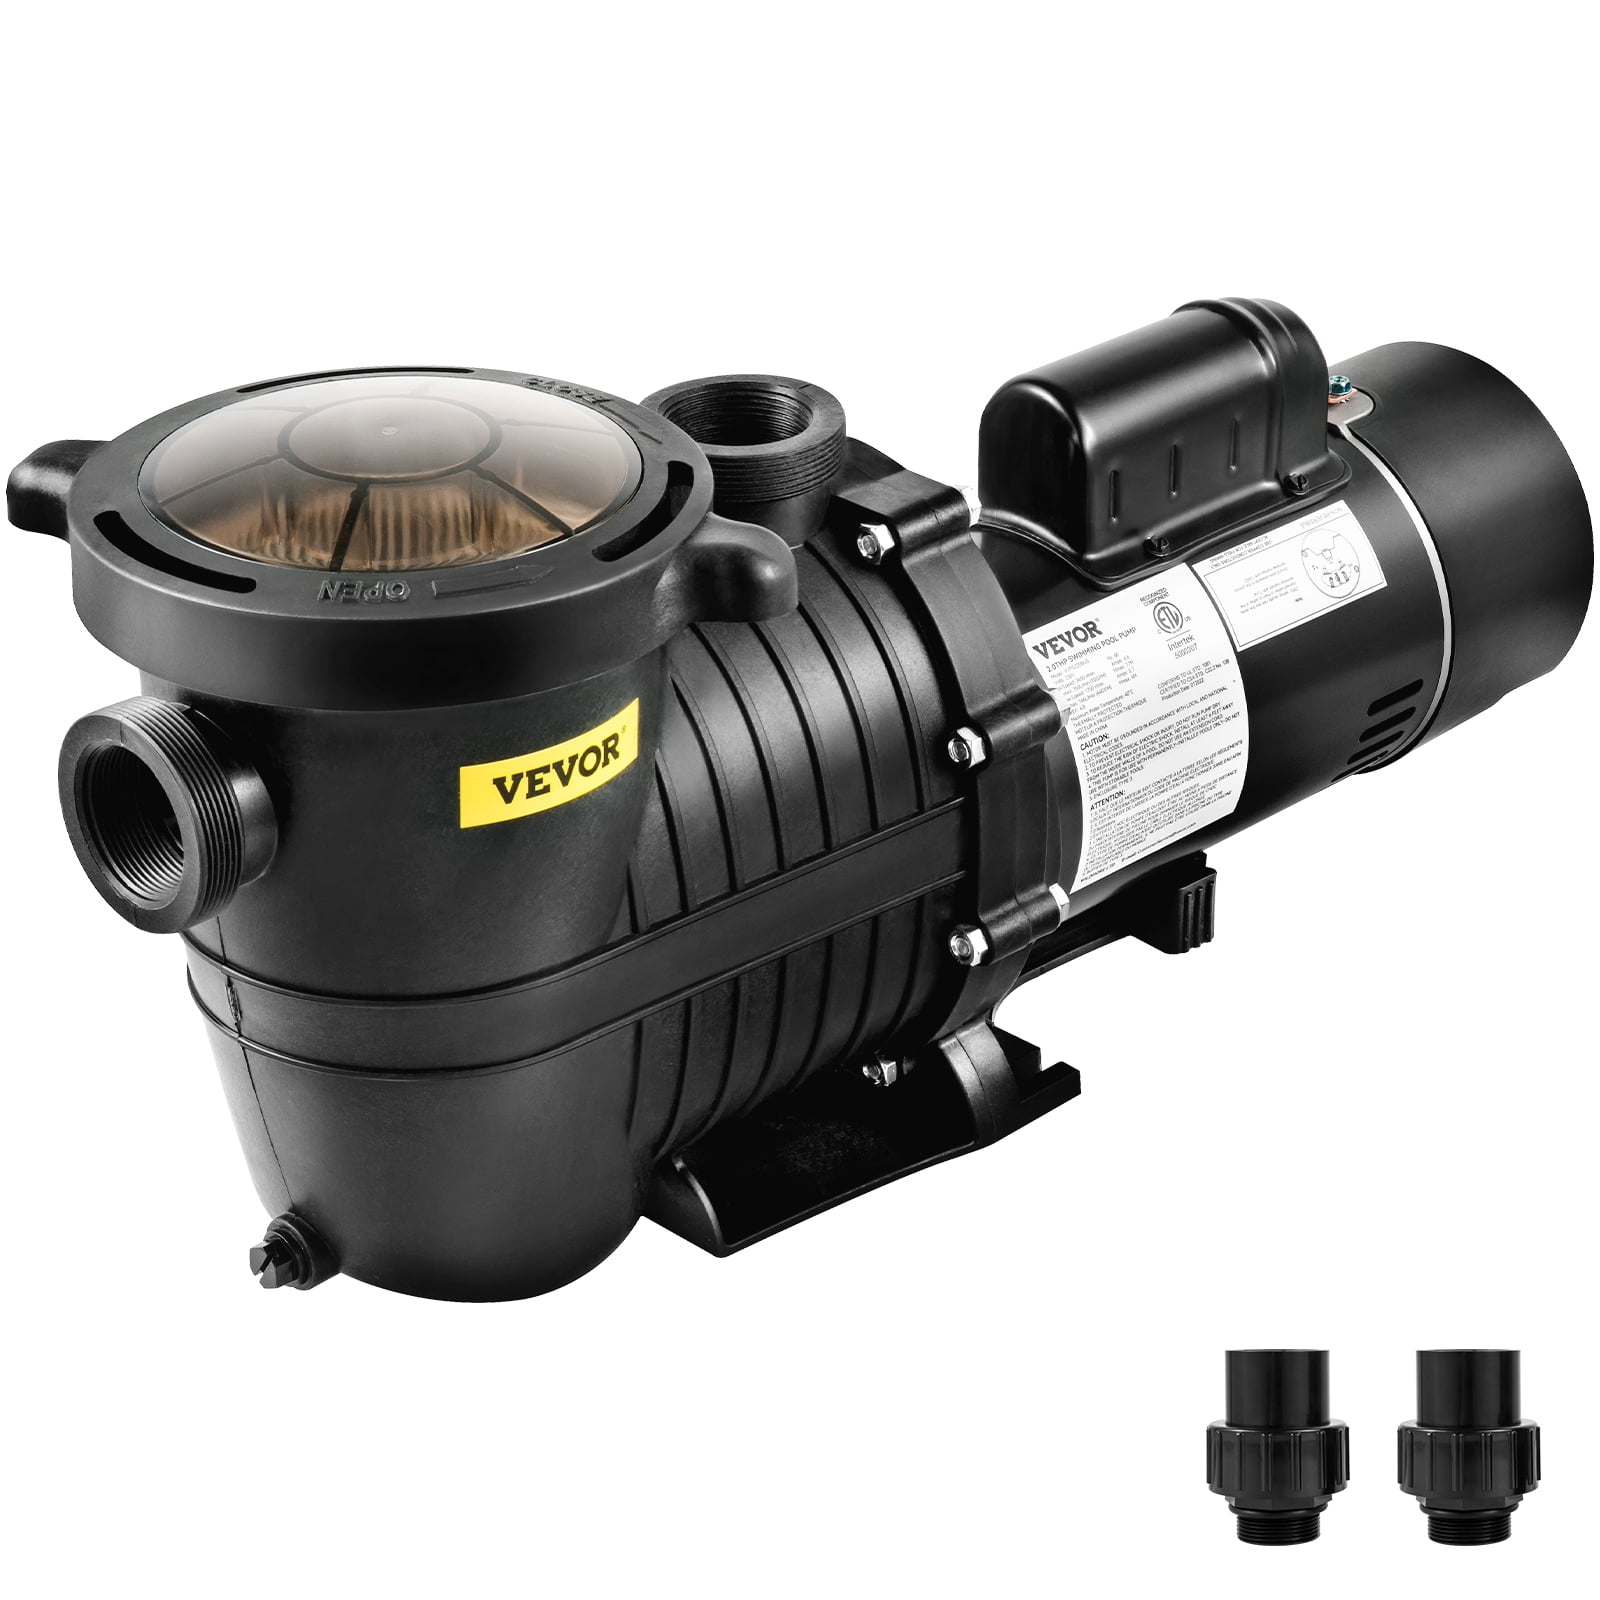 VEVOR Swimming Pool Pump, 2HP 230V, 1500W Double Speed Pump for in/Above Ground w/ Strainer Basket, 5520GPH Max. Flow, of ETL - Walmart.com